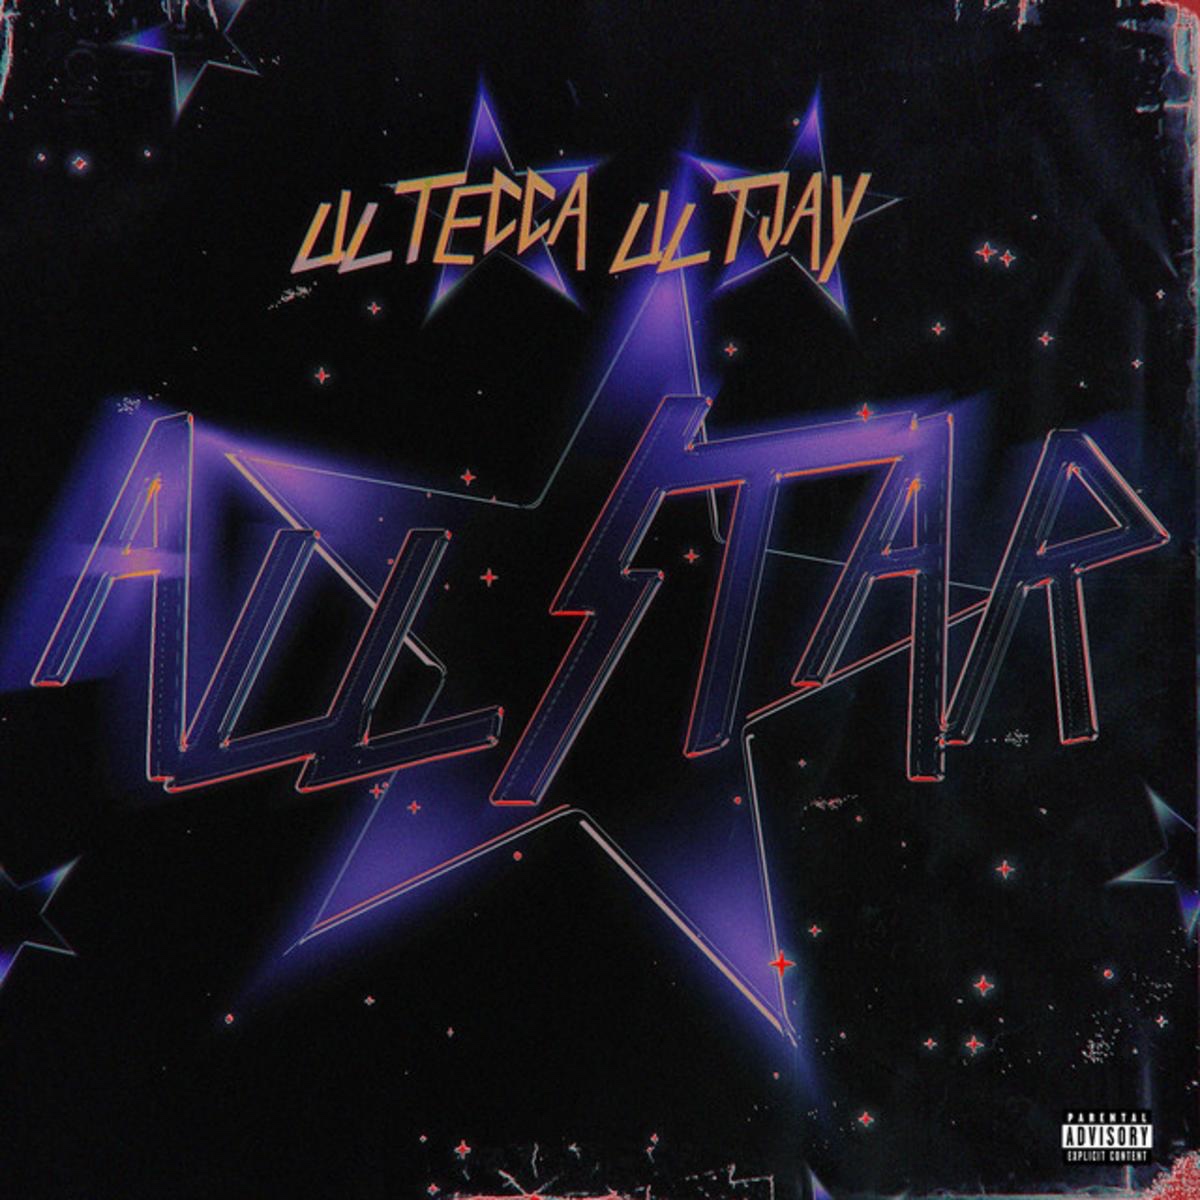 Lil Tecca & Lil Tjay Join Forces For “All Star”